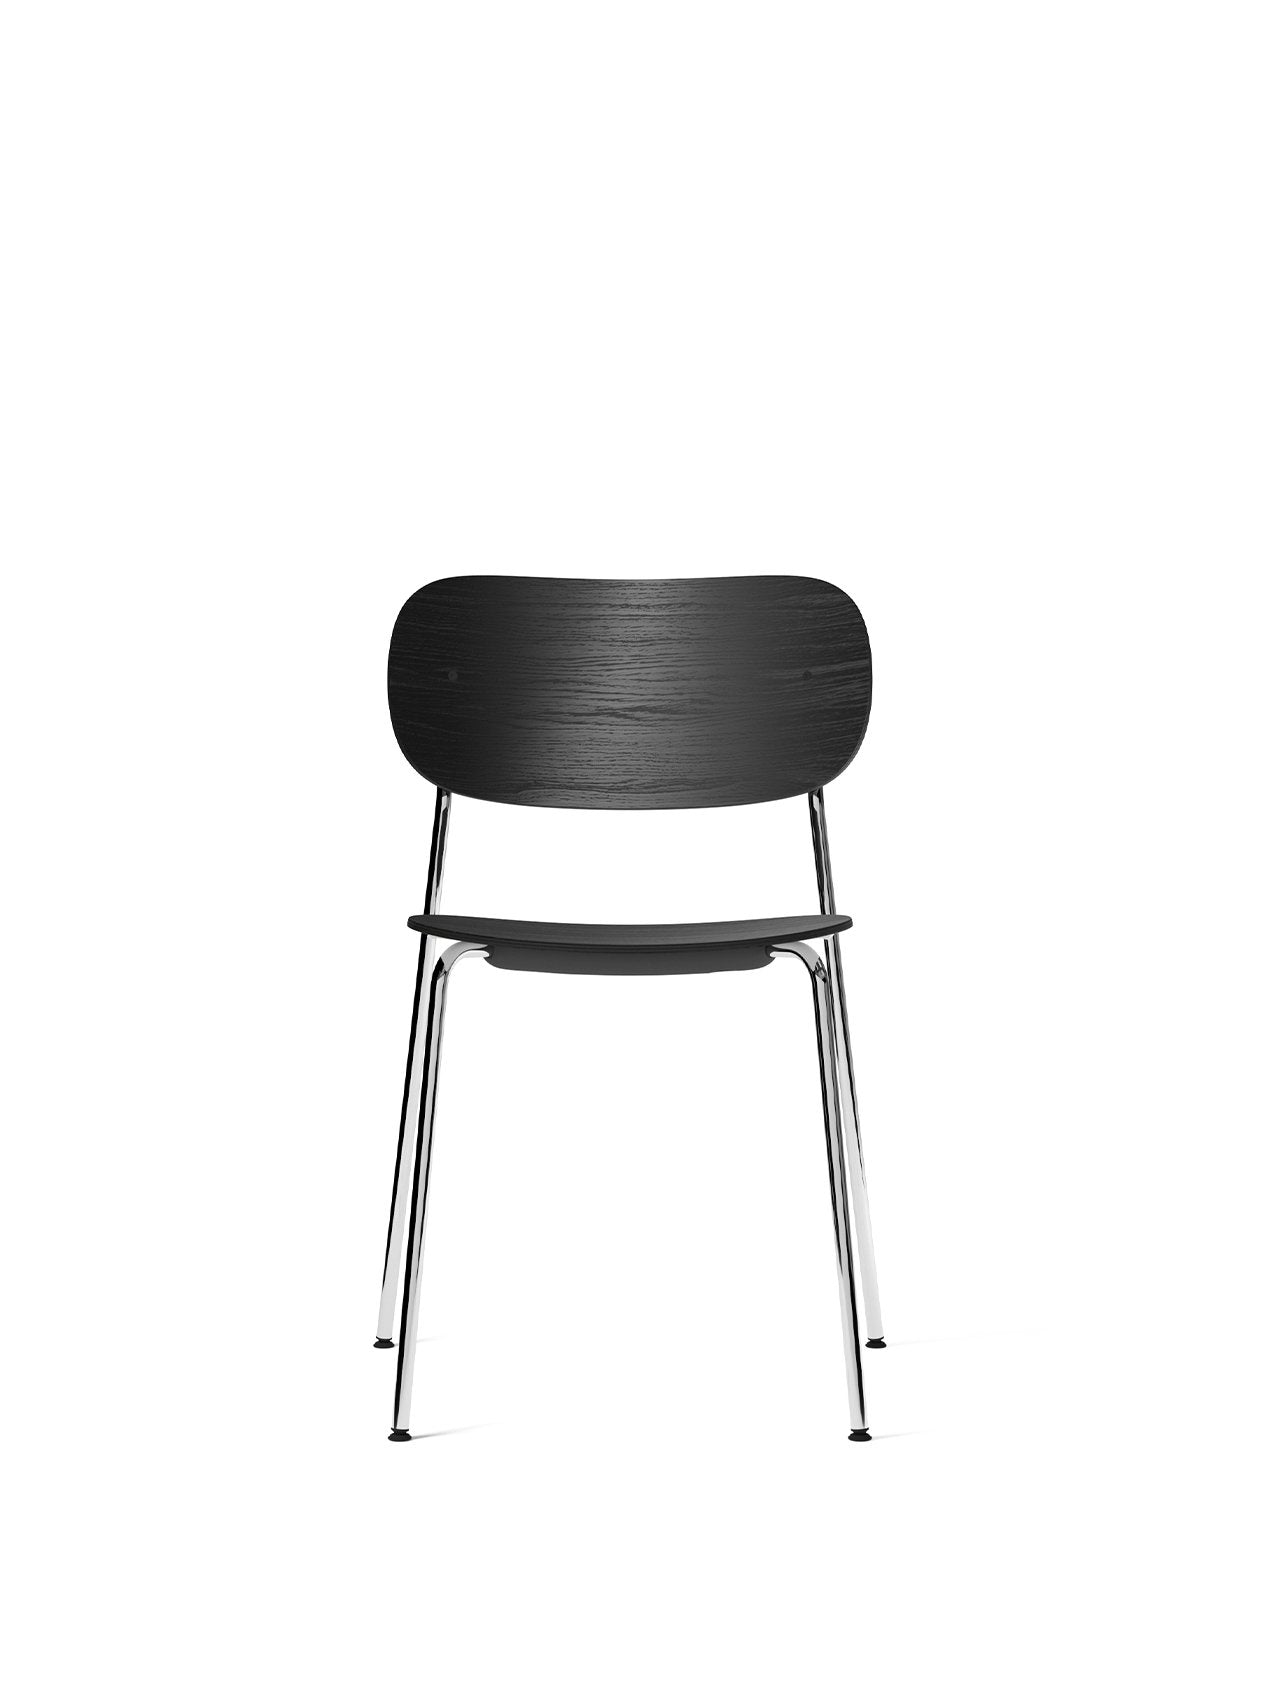 Co Chair, Non-Upholstered-Chair-Norm Architects-menu-minimalist-modern-danish-design-home-decor